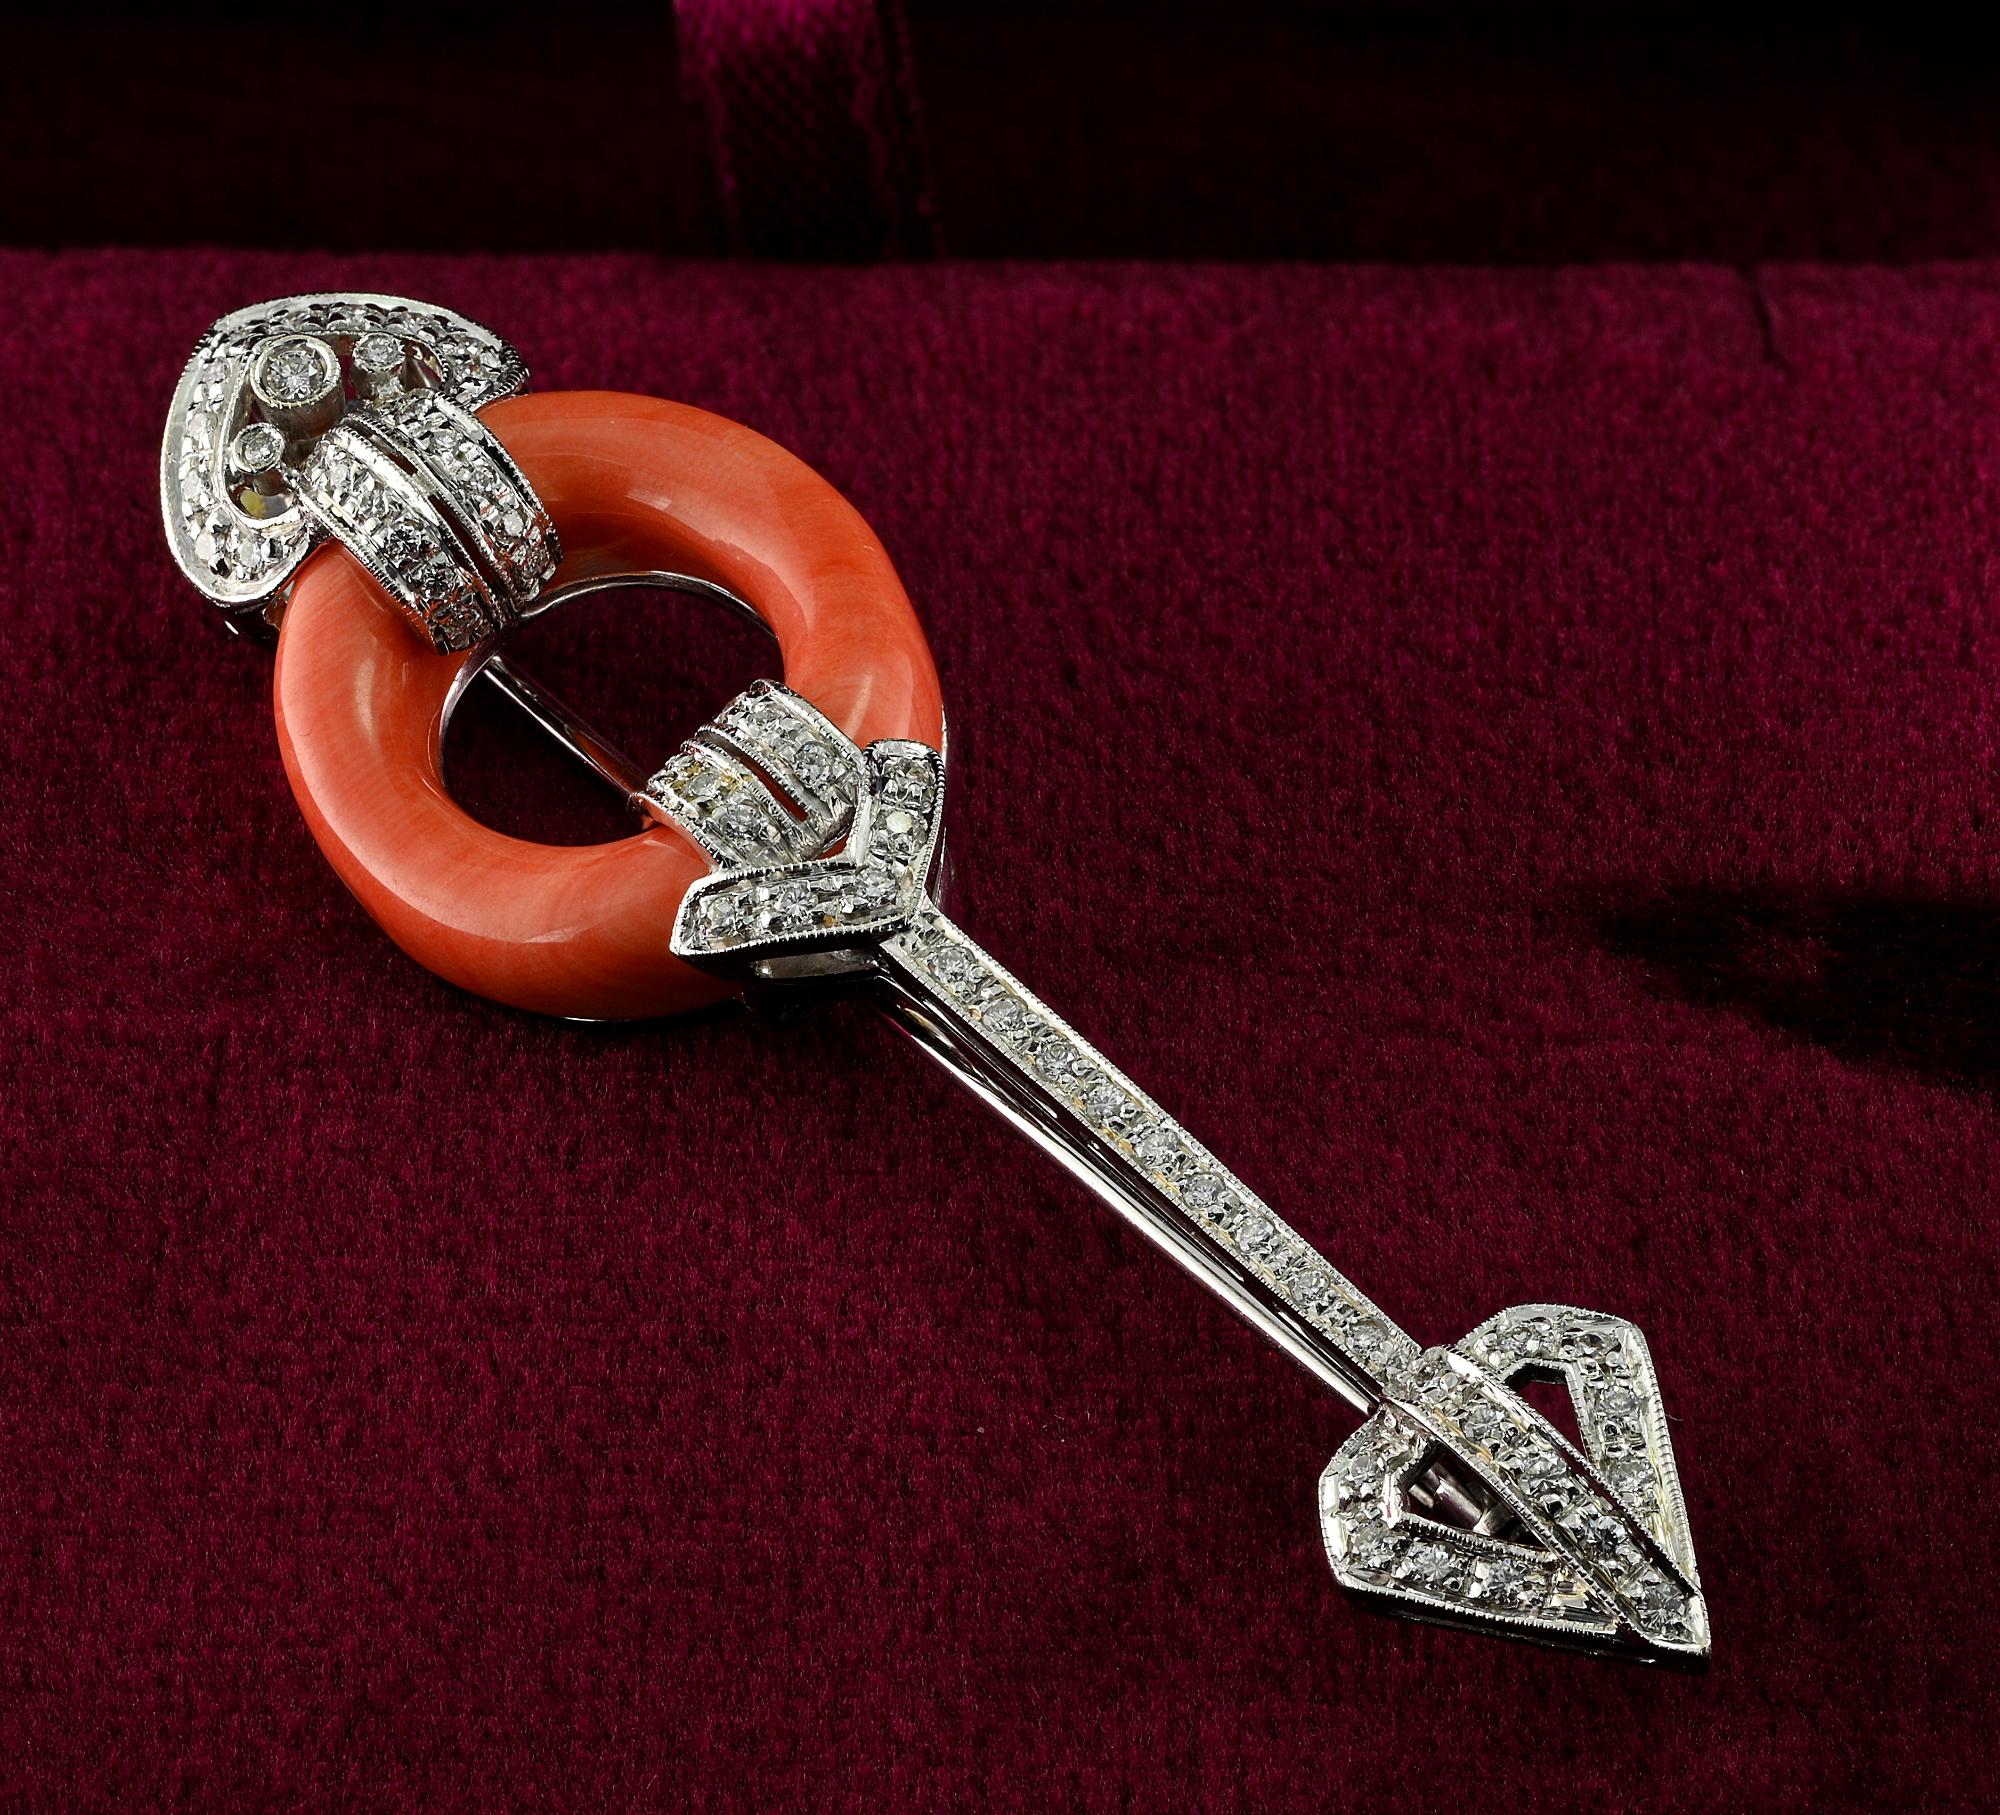 This superb vintage brooch is 1945 ca
Italian origin
Arrow design adorned with a natural Coral element interlaced in between
Set with brilliant cut Diamonds for .95 Ct altogether G VVS
Hand crafted as unique of solid 18 KT white gold
measuring 67 x